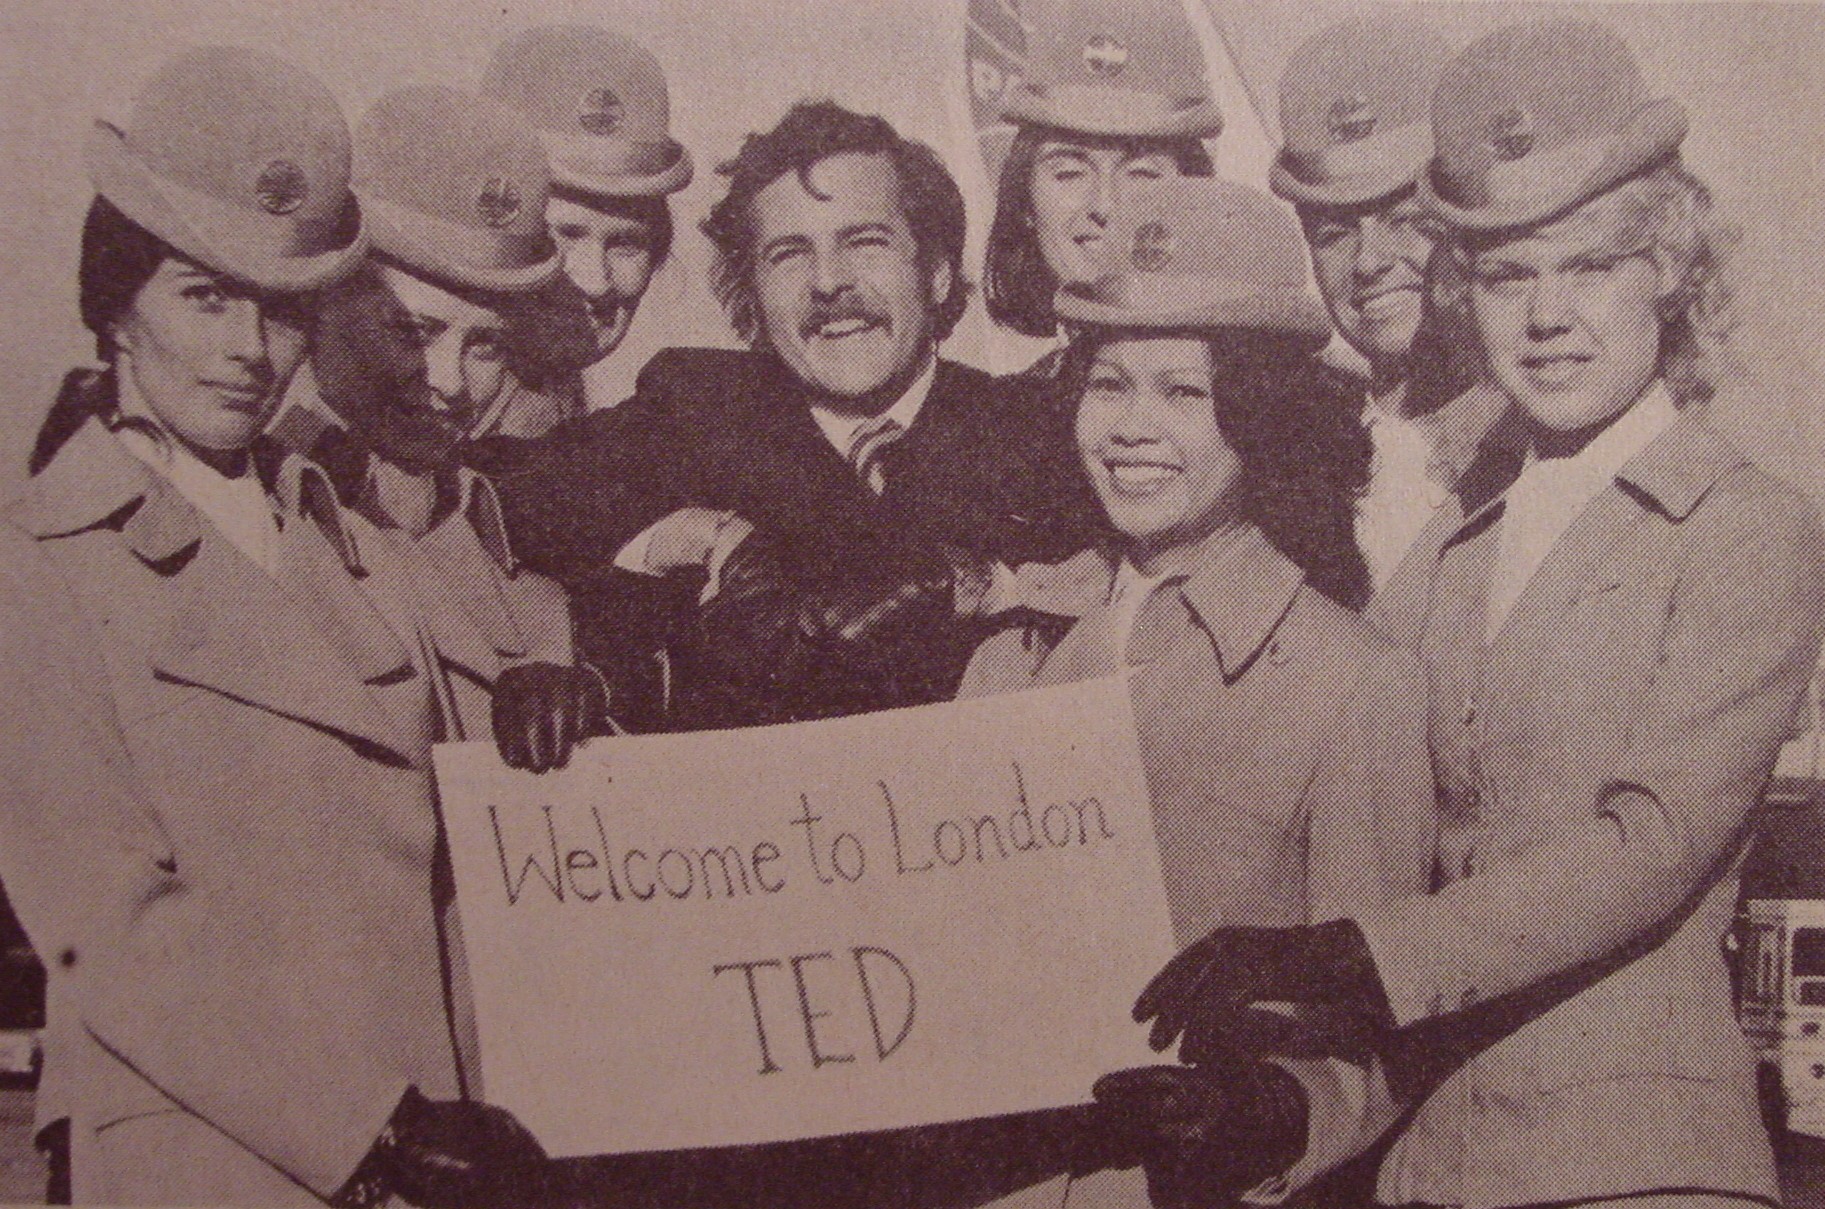 1972 When Ted Macauley became the first male flight attendant at the London base he was given a warm welcome by his female colleagues.